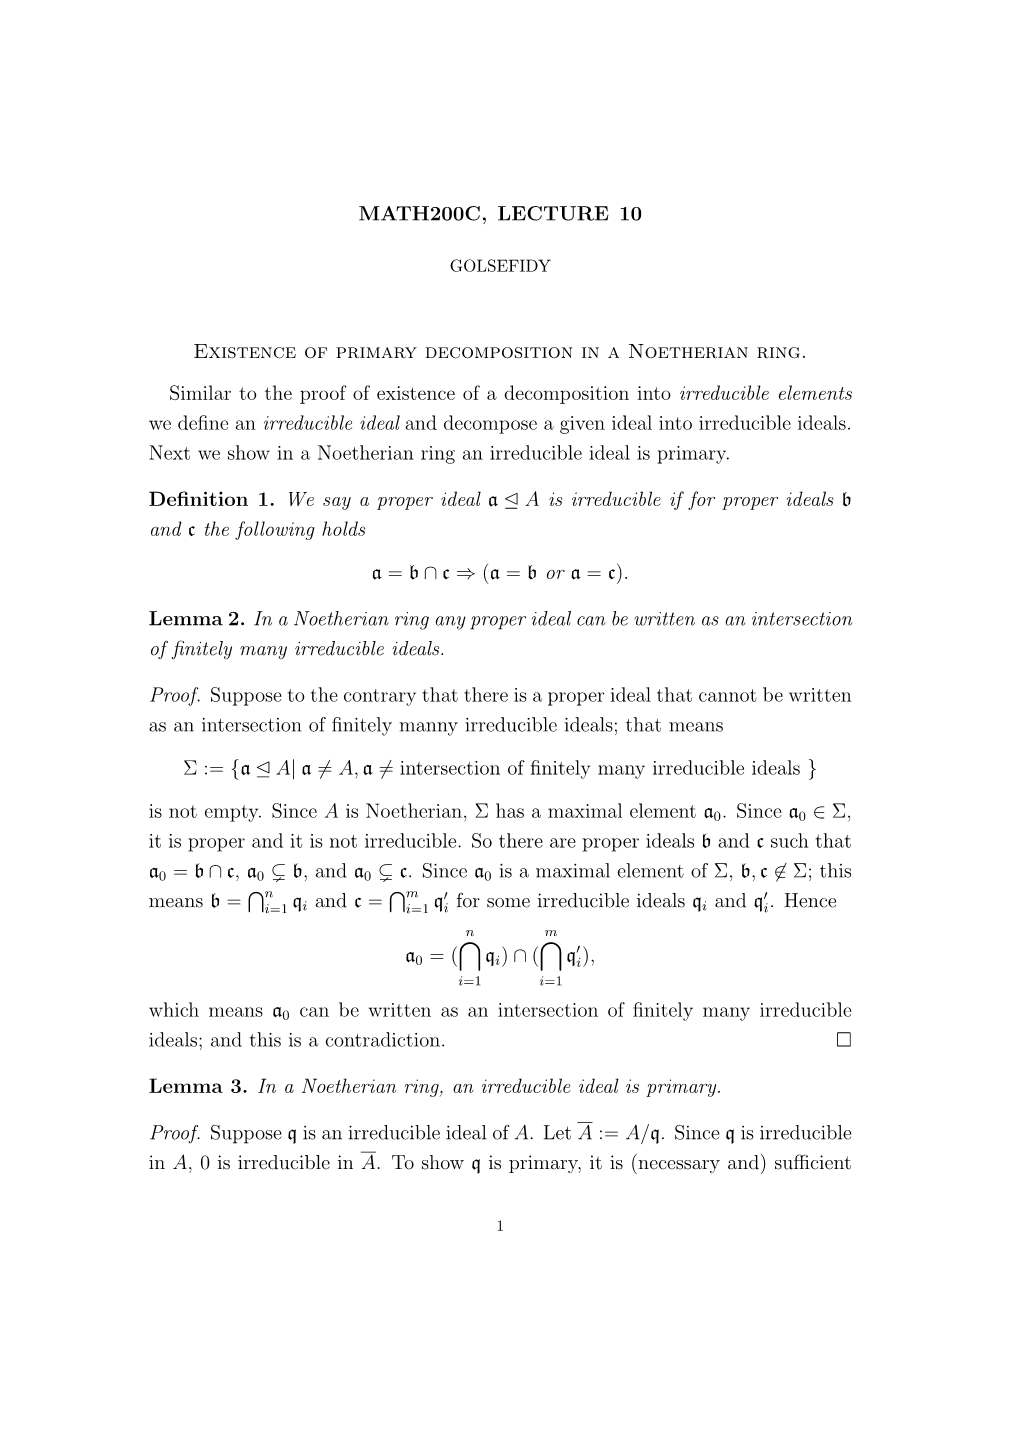 MATH200C, LECTURE 10 Existence of Primary Decomposition in A